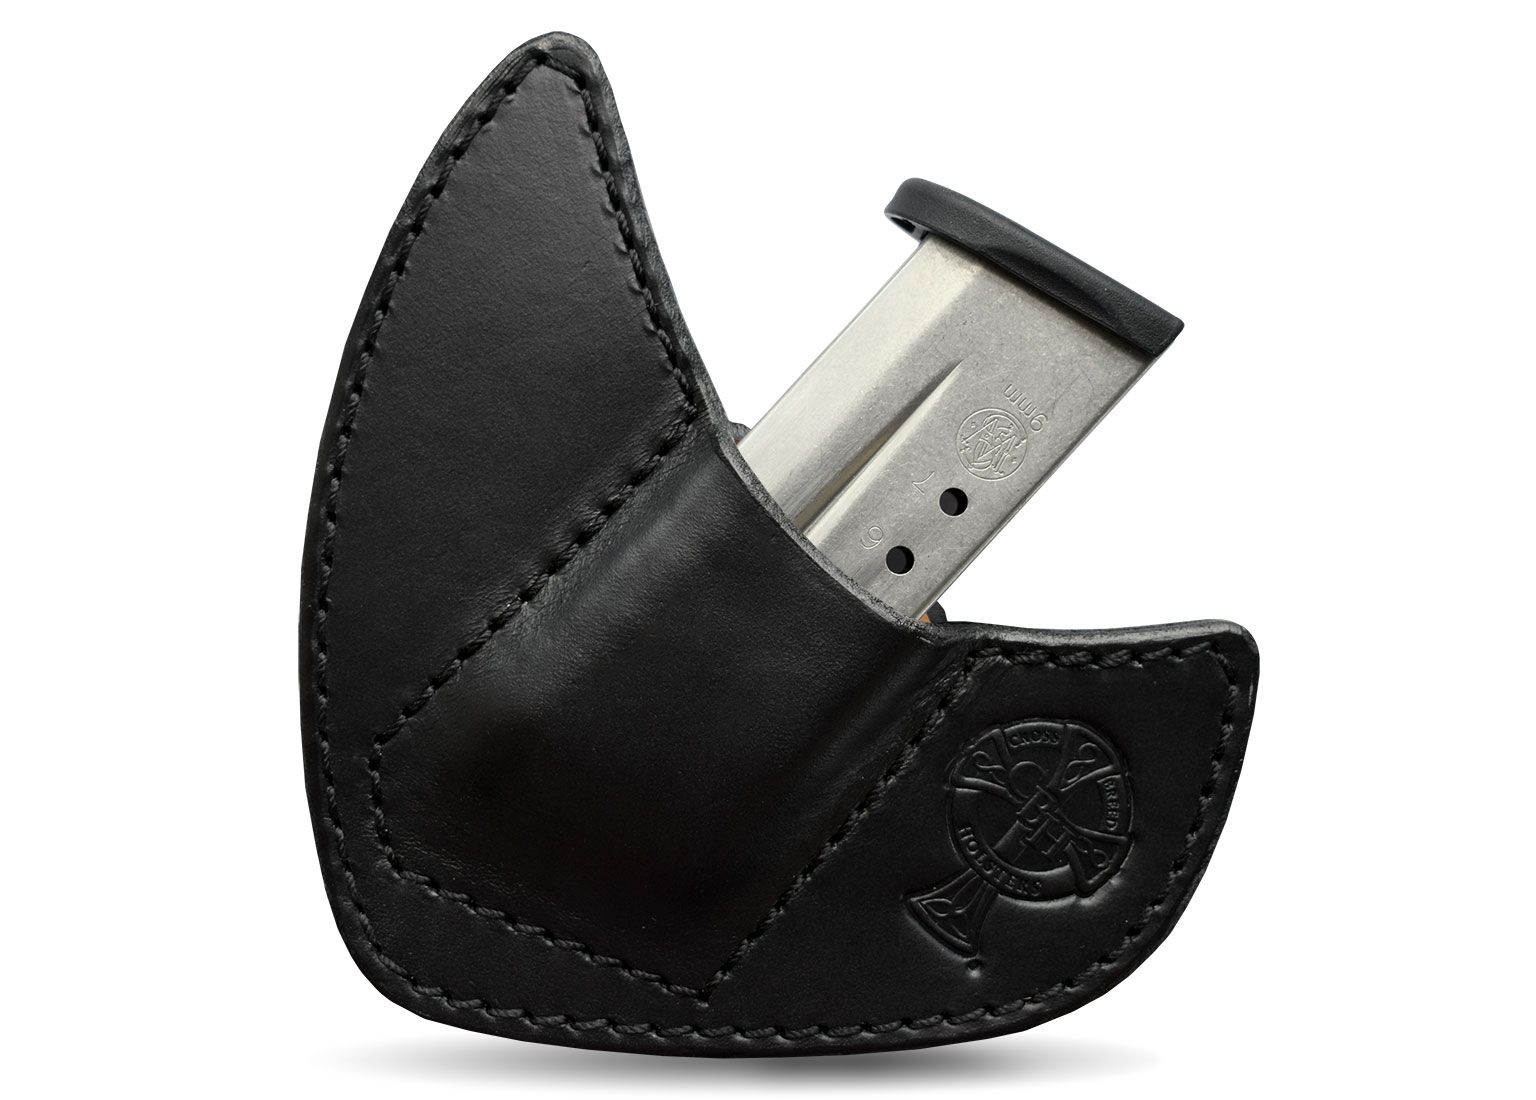 Ankle Holster by LPV - Fits Glock, Ruger, SIG P365, Most 9mm Pistols, Gun  Holsters -  Canada